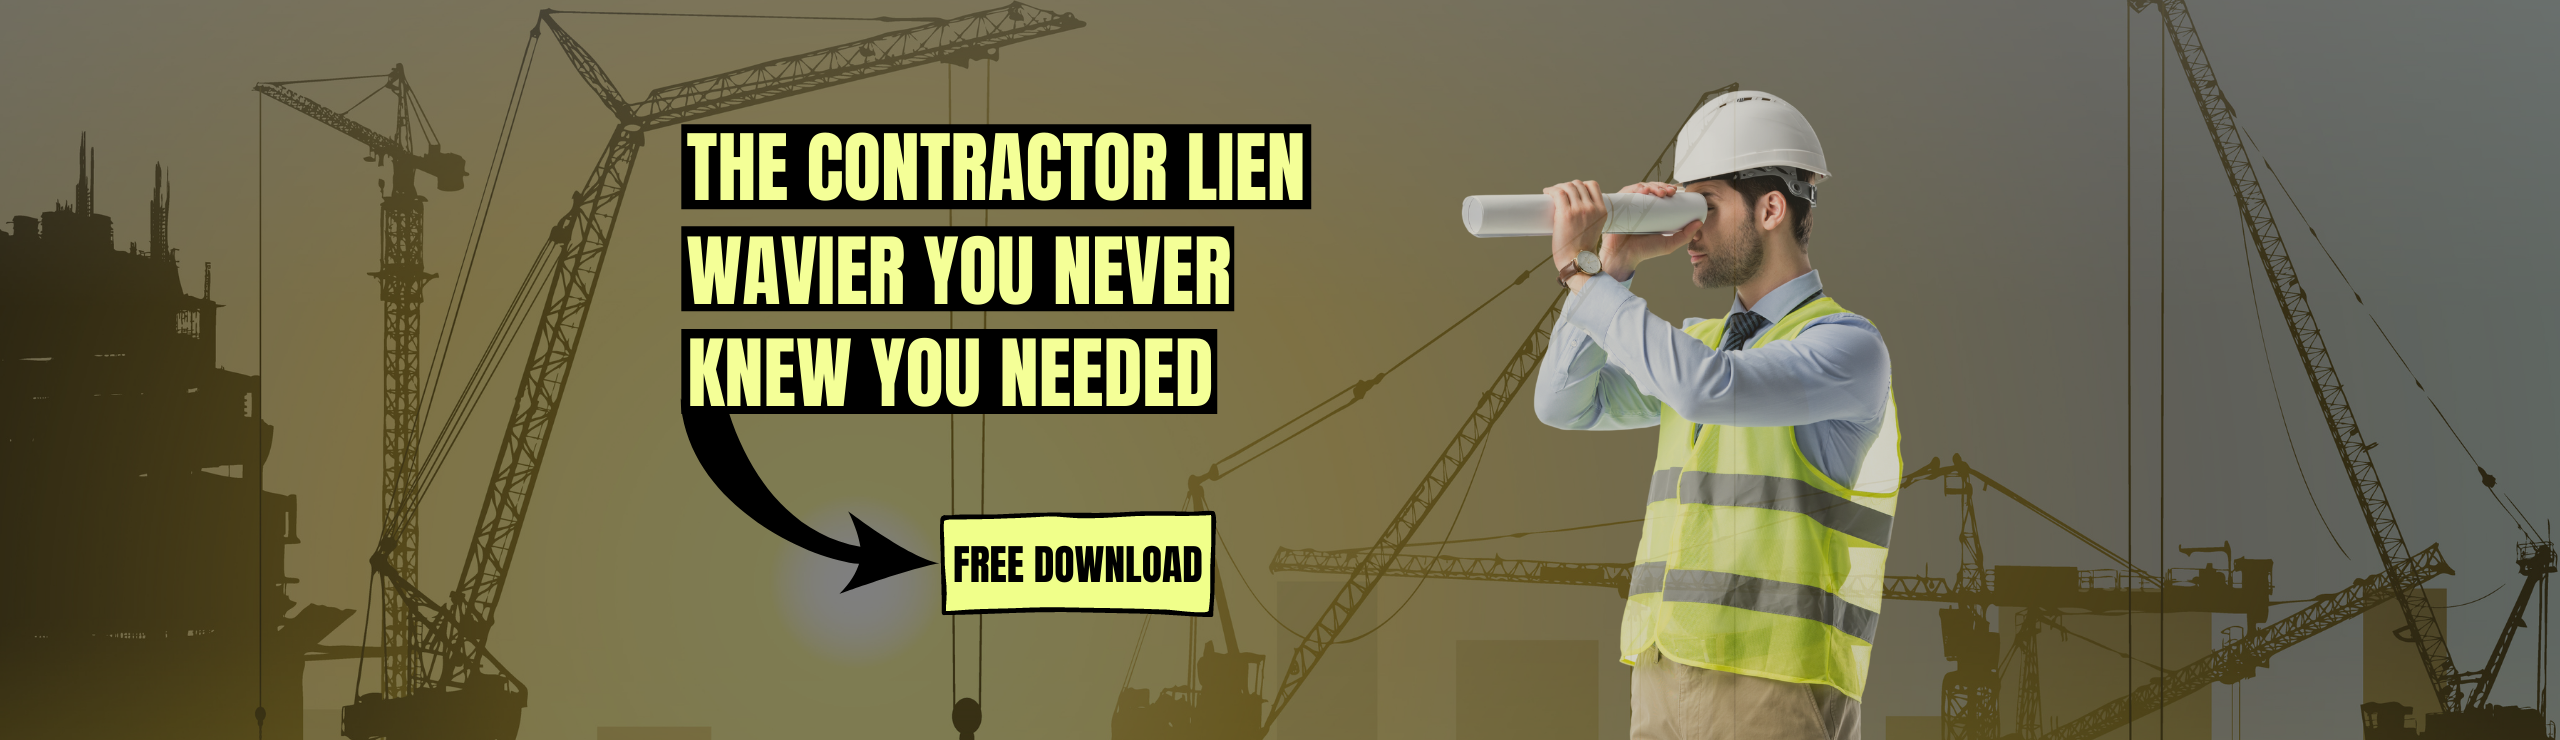 Swipe & Deploy: The Contractor Lien Wavier You Never Knew You Needed